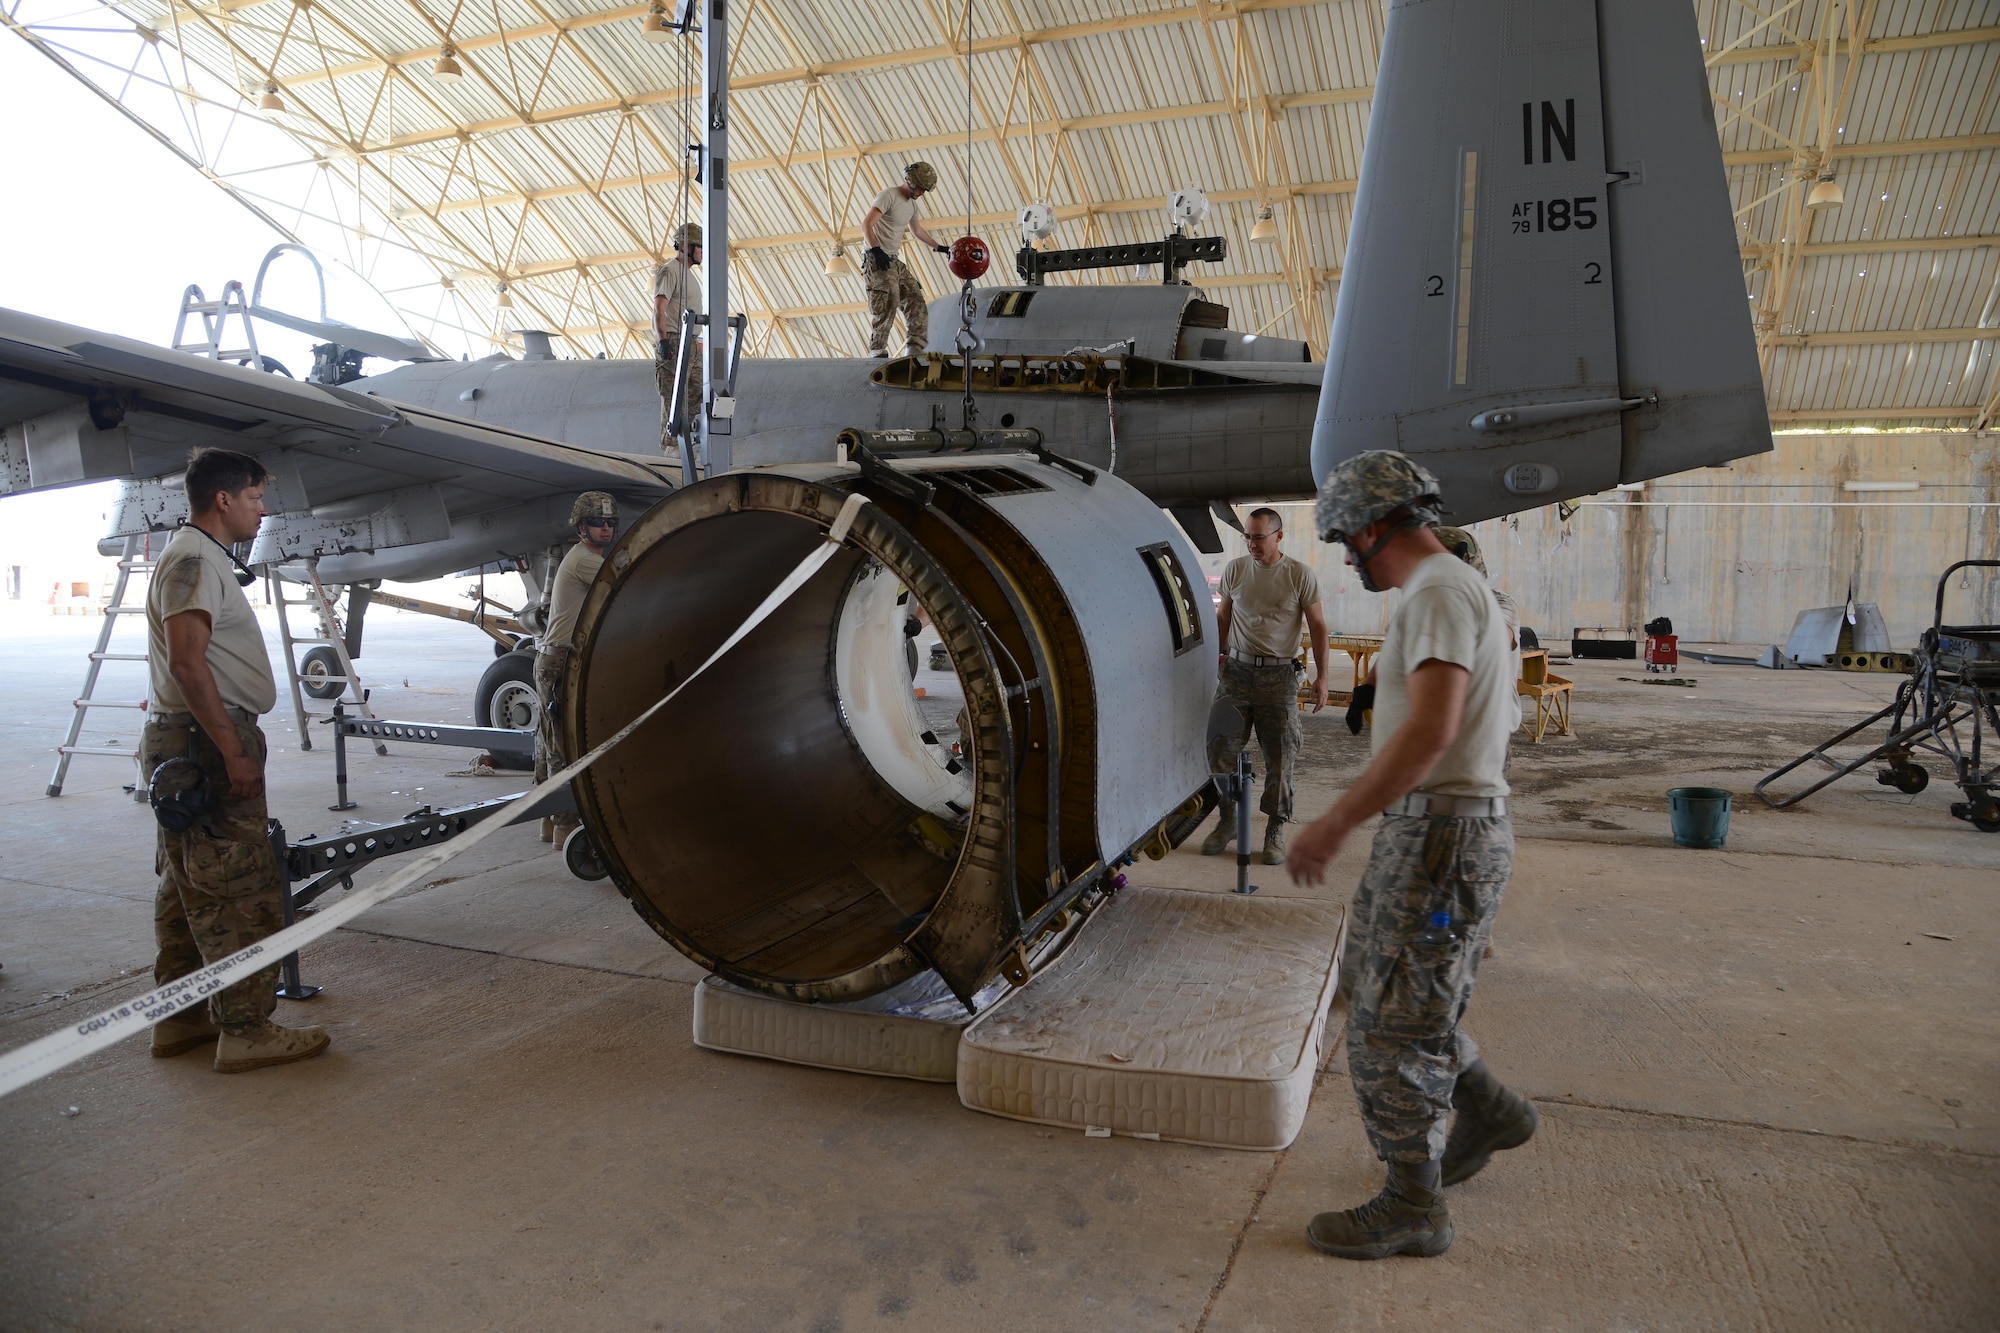 Airmen from the 332nd Expeditionary Maintenance Squadron remove a damaged nacelle, the protective covering on the engine, from an A-10C Thunderbolt II at Al Asad Air Base, Iraq. A maintenance response team from the 332nd EMXG repaired the jet and got it back in the air – a task that could have taken more than a month – in less than five days. (U.S. Air Force photo/Tech. Sgt. Jared Marquis)